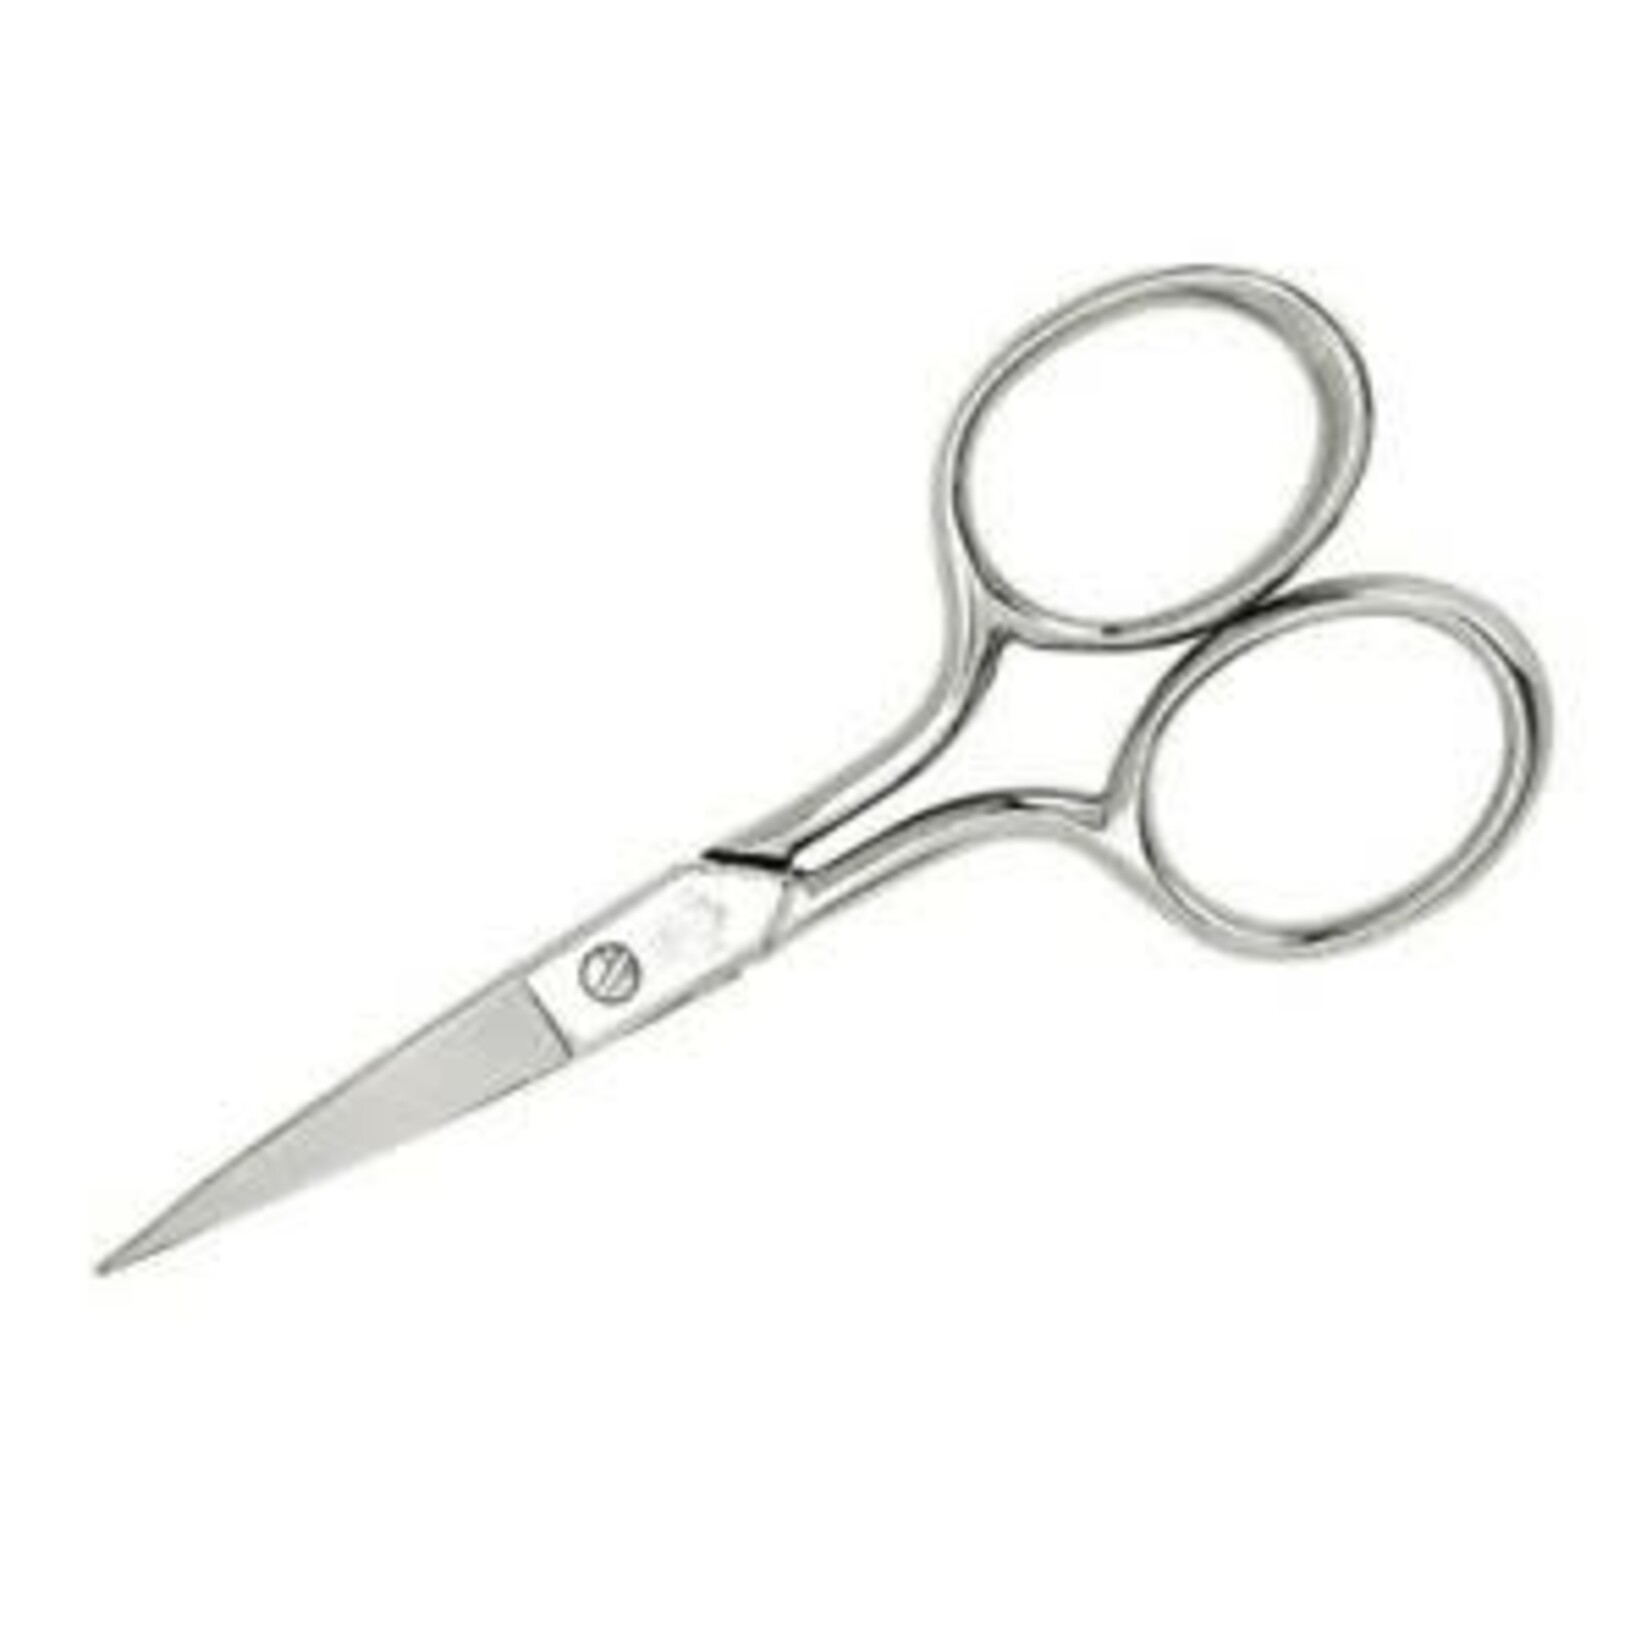 Forged Embroidery Scissor - 4''